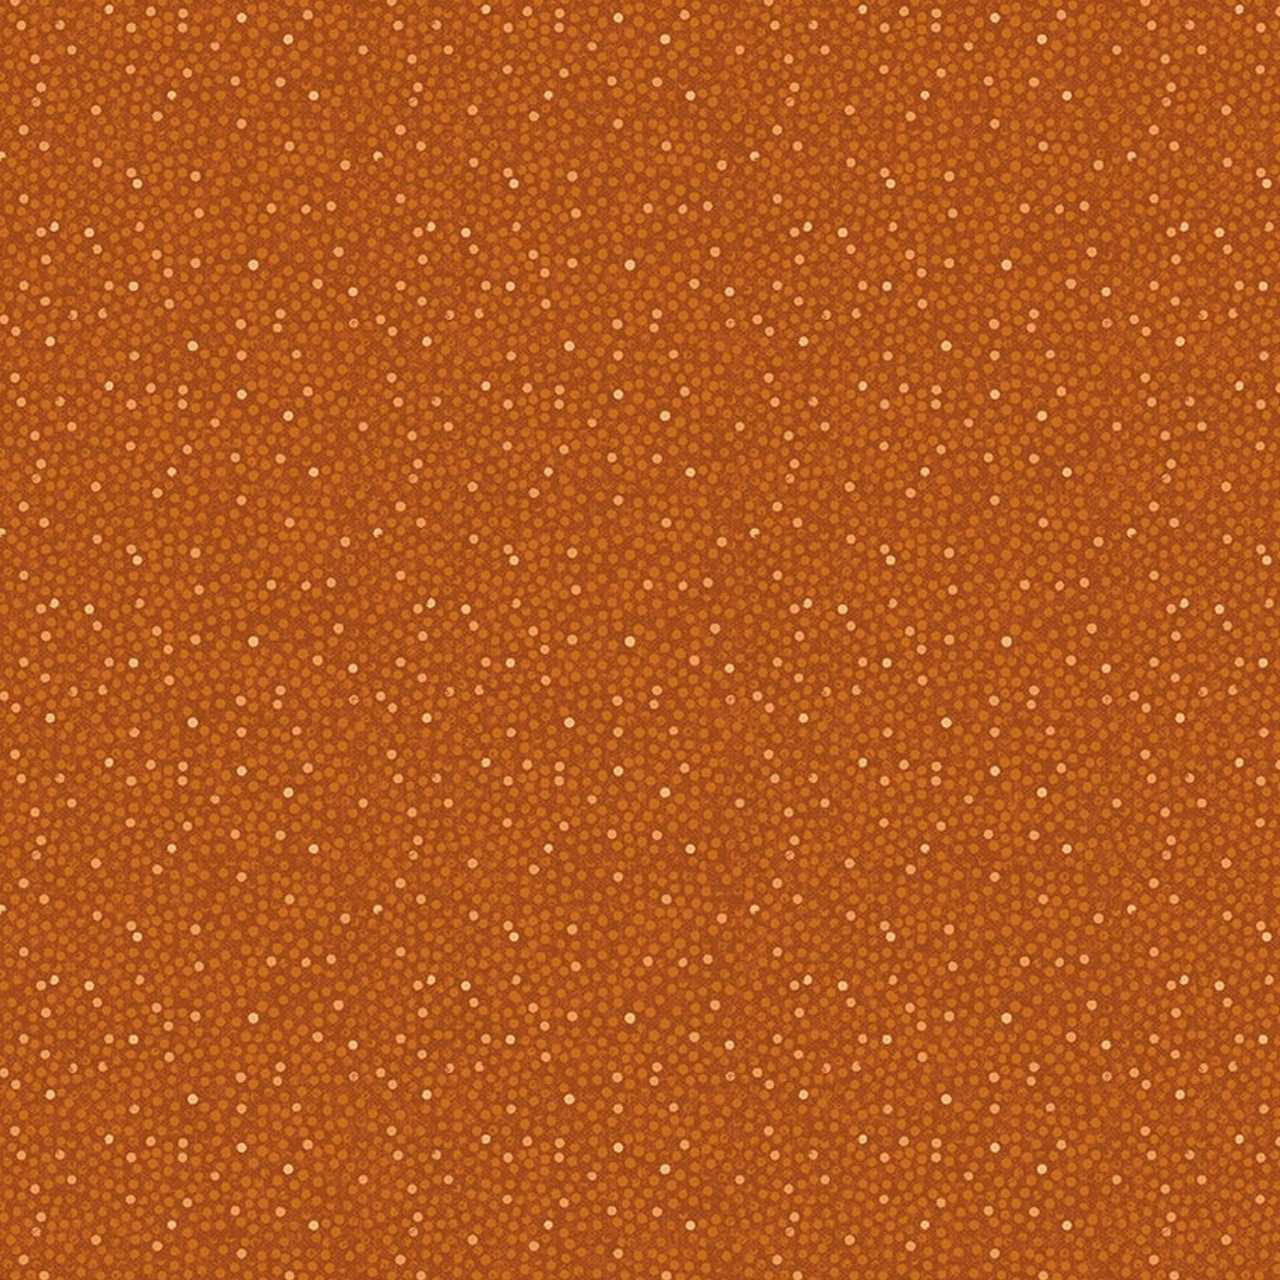 Stof European Solaire Small Dot Cognac Cotton Fabric By The Yard